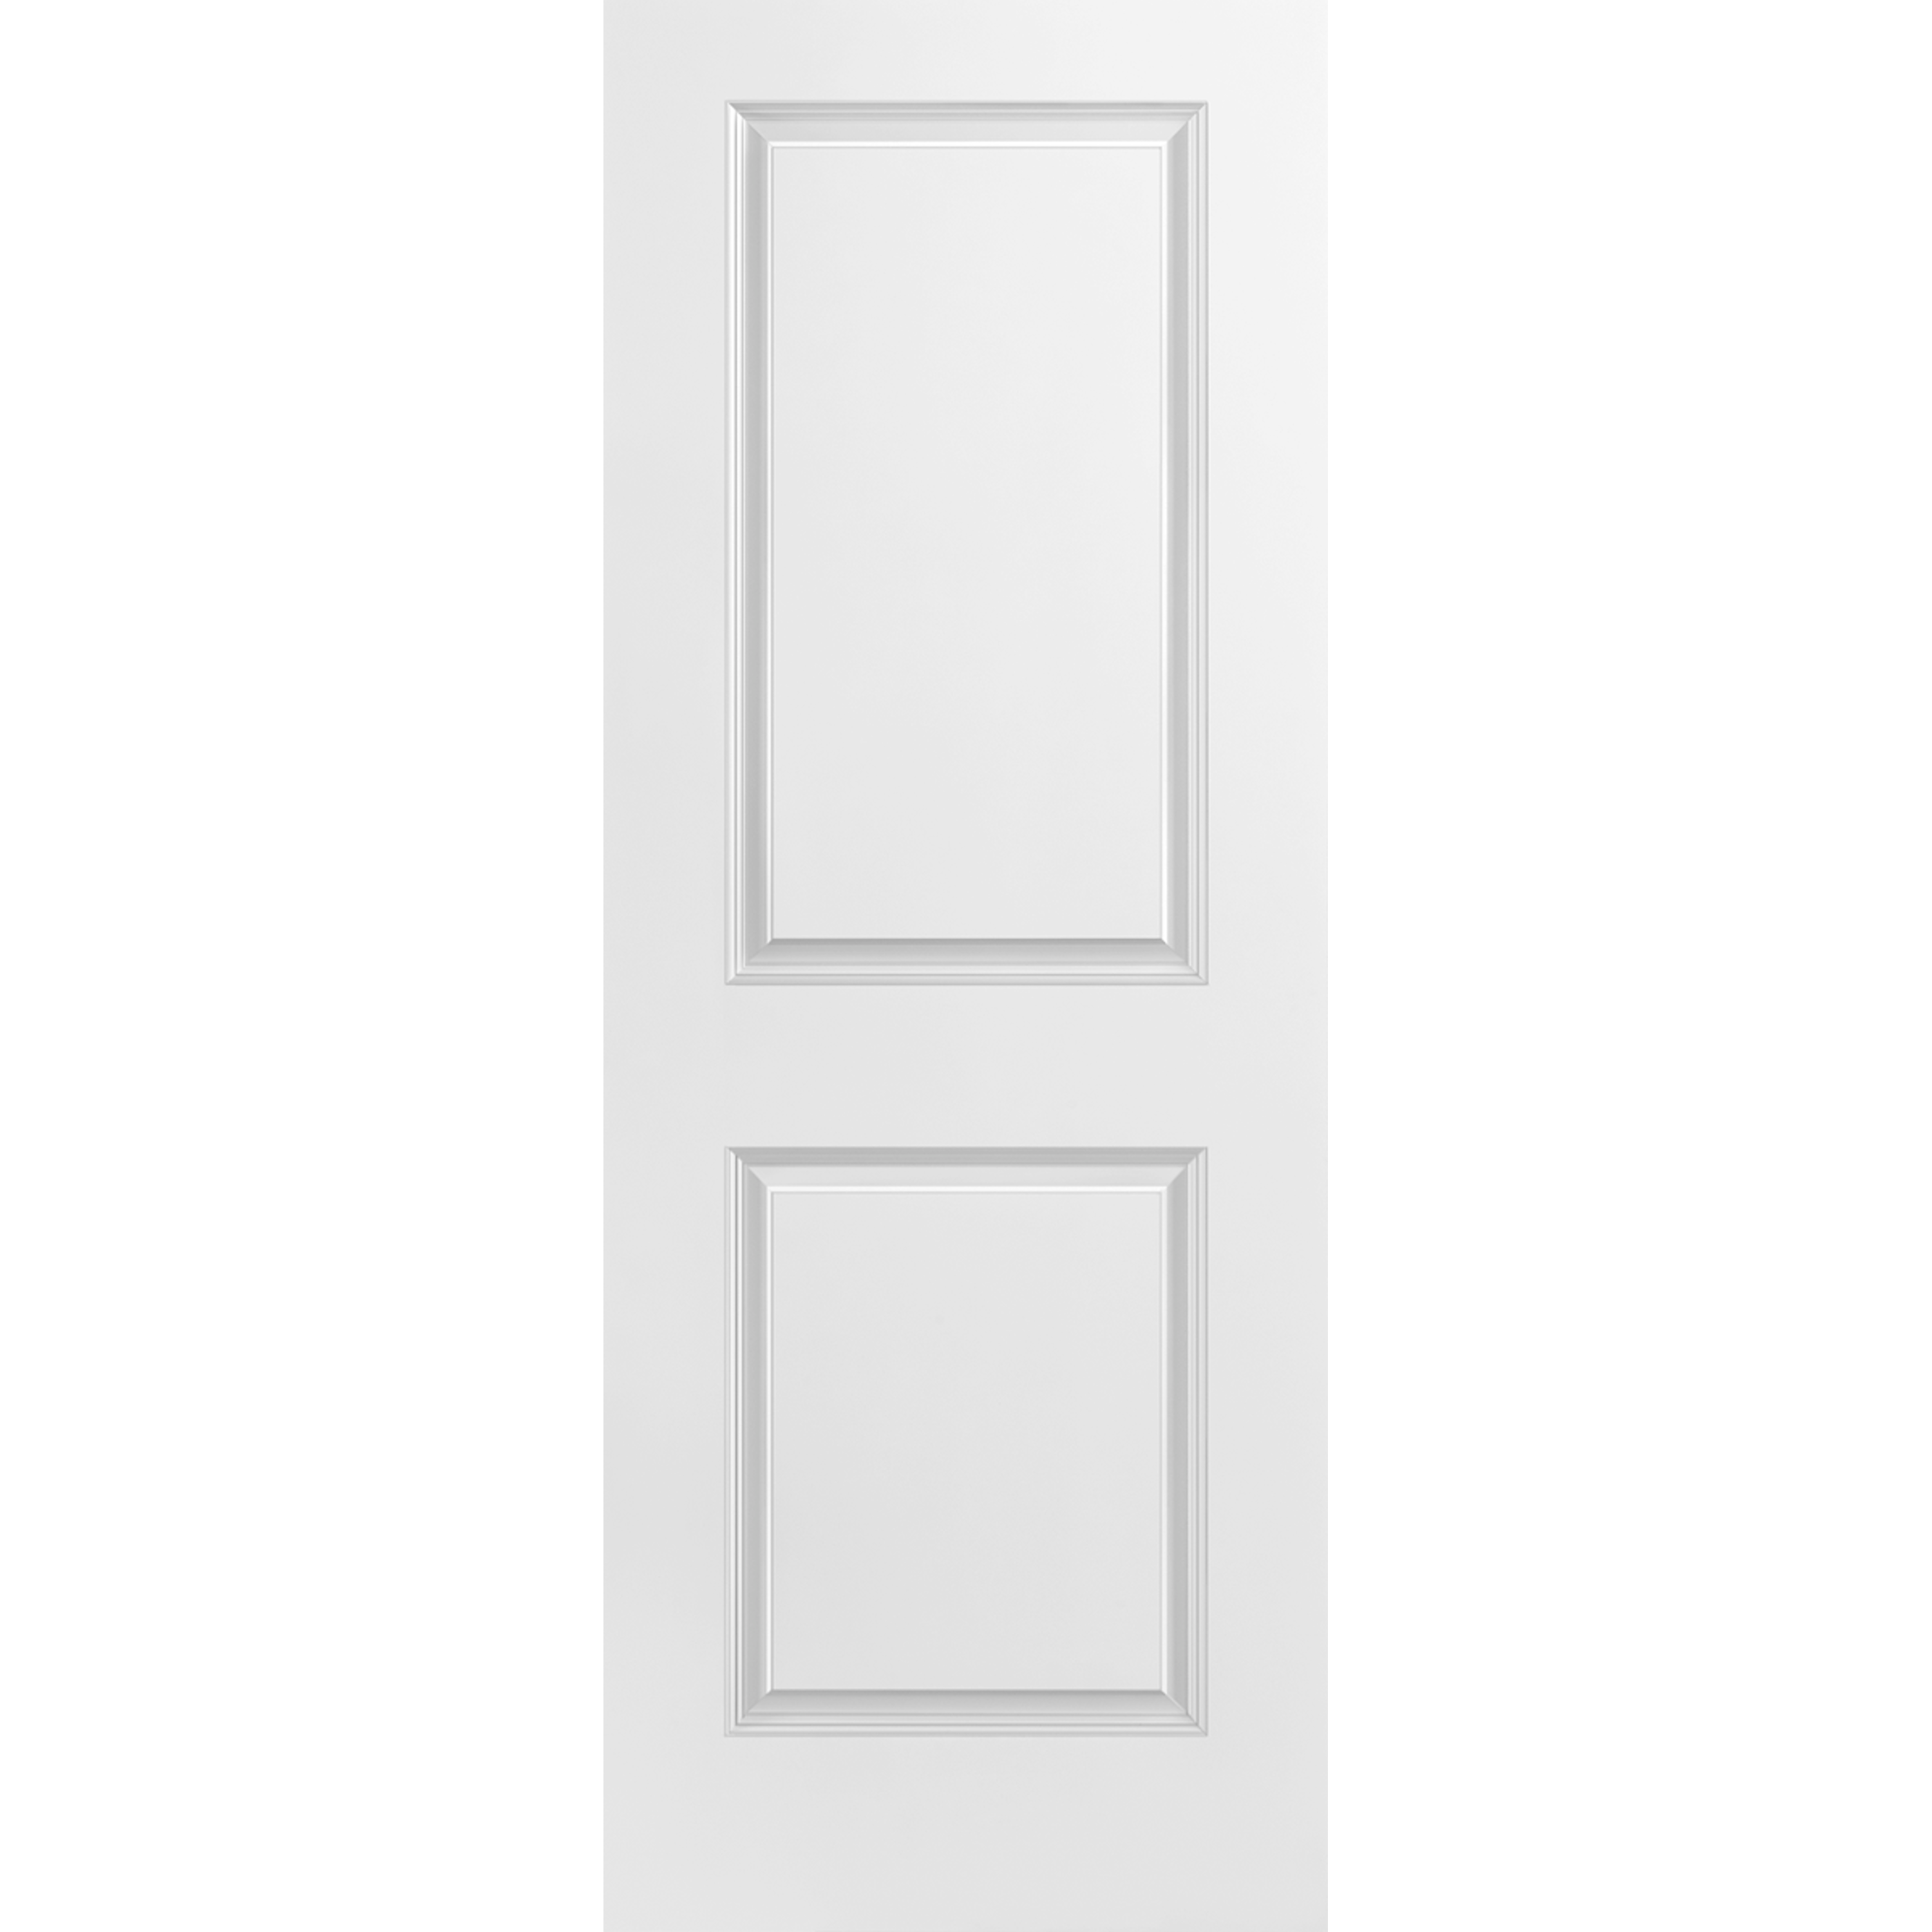 34x80 2 Panel Square Smooth Moulded Fast Fit Door with 4-5/8" PFJ Jamb